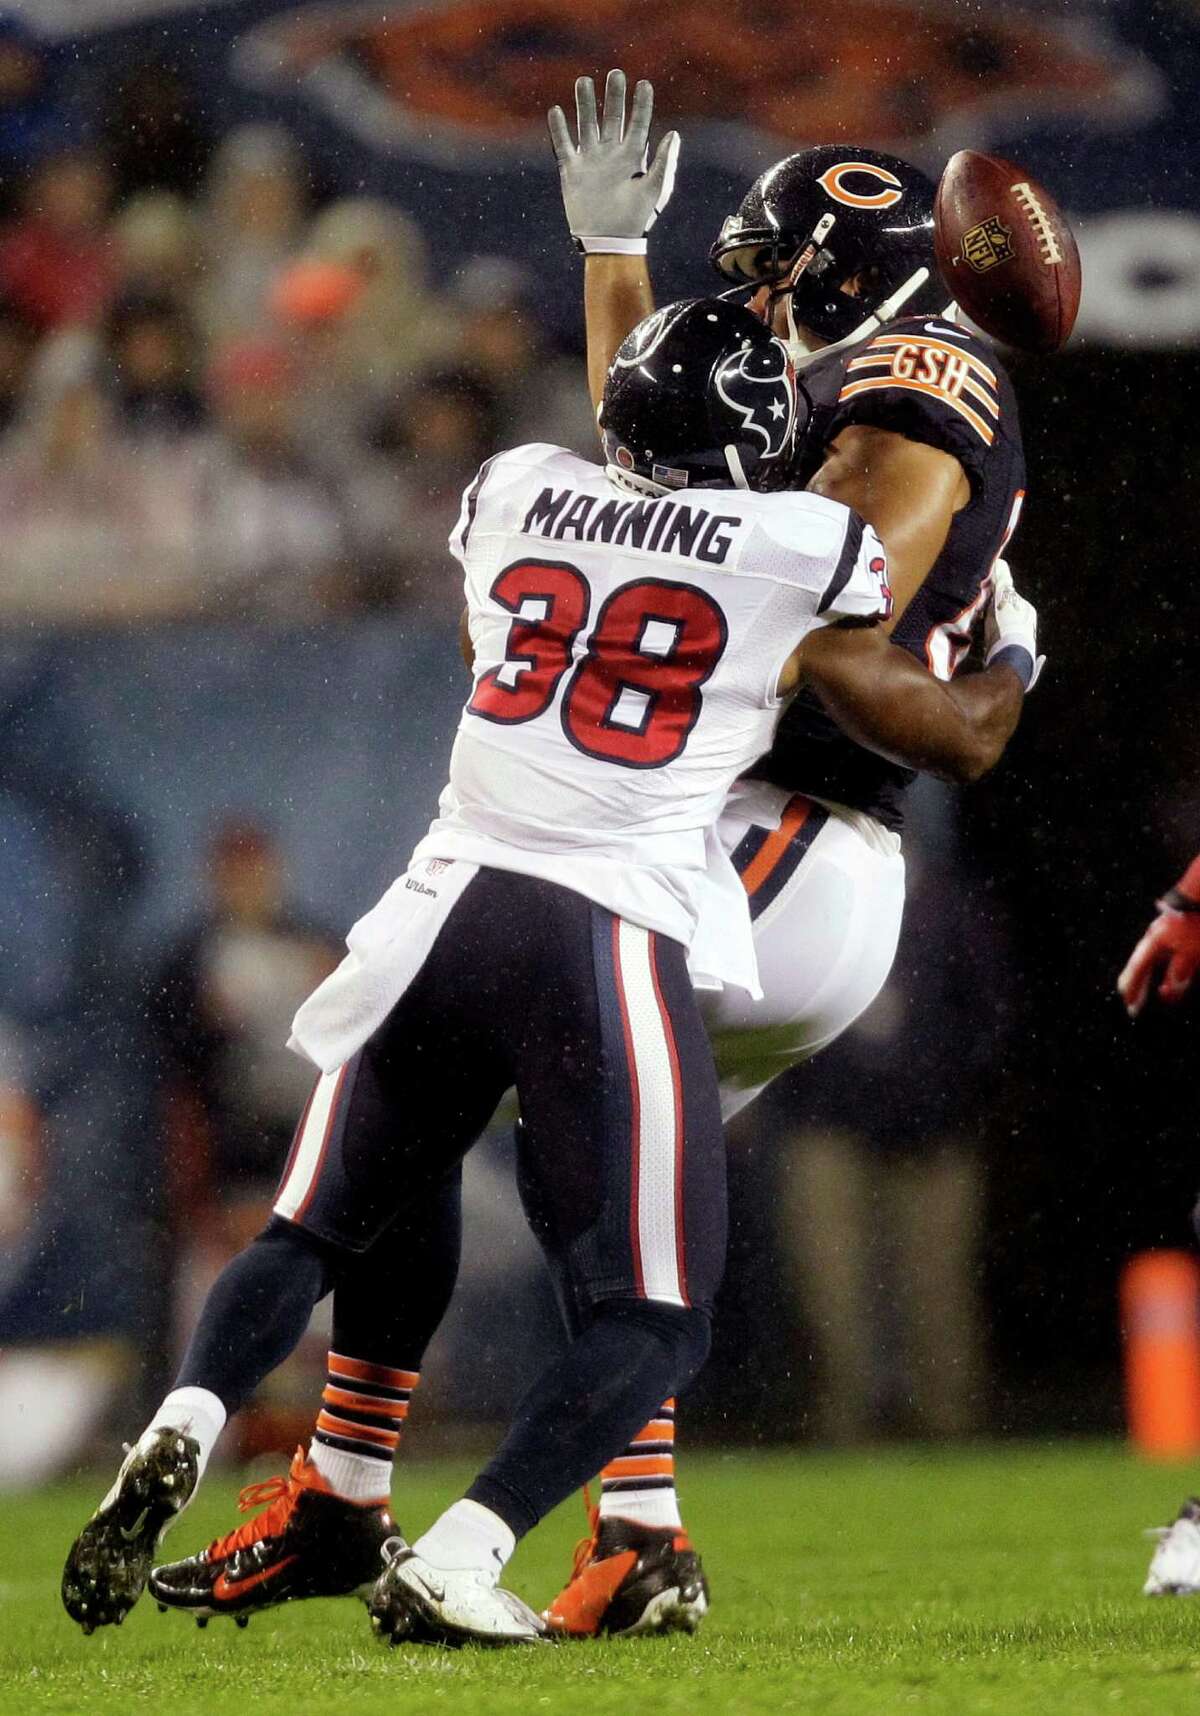 Chicago Bears tight end Kellen Davis fumbles as he is tackled by Houston Texans safety Danieal Manning (38) during the first half an NFL football game, Sunday, Nov. 11, 2012, in Chicago. (AP Photo/Nam Y. Huh)